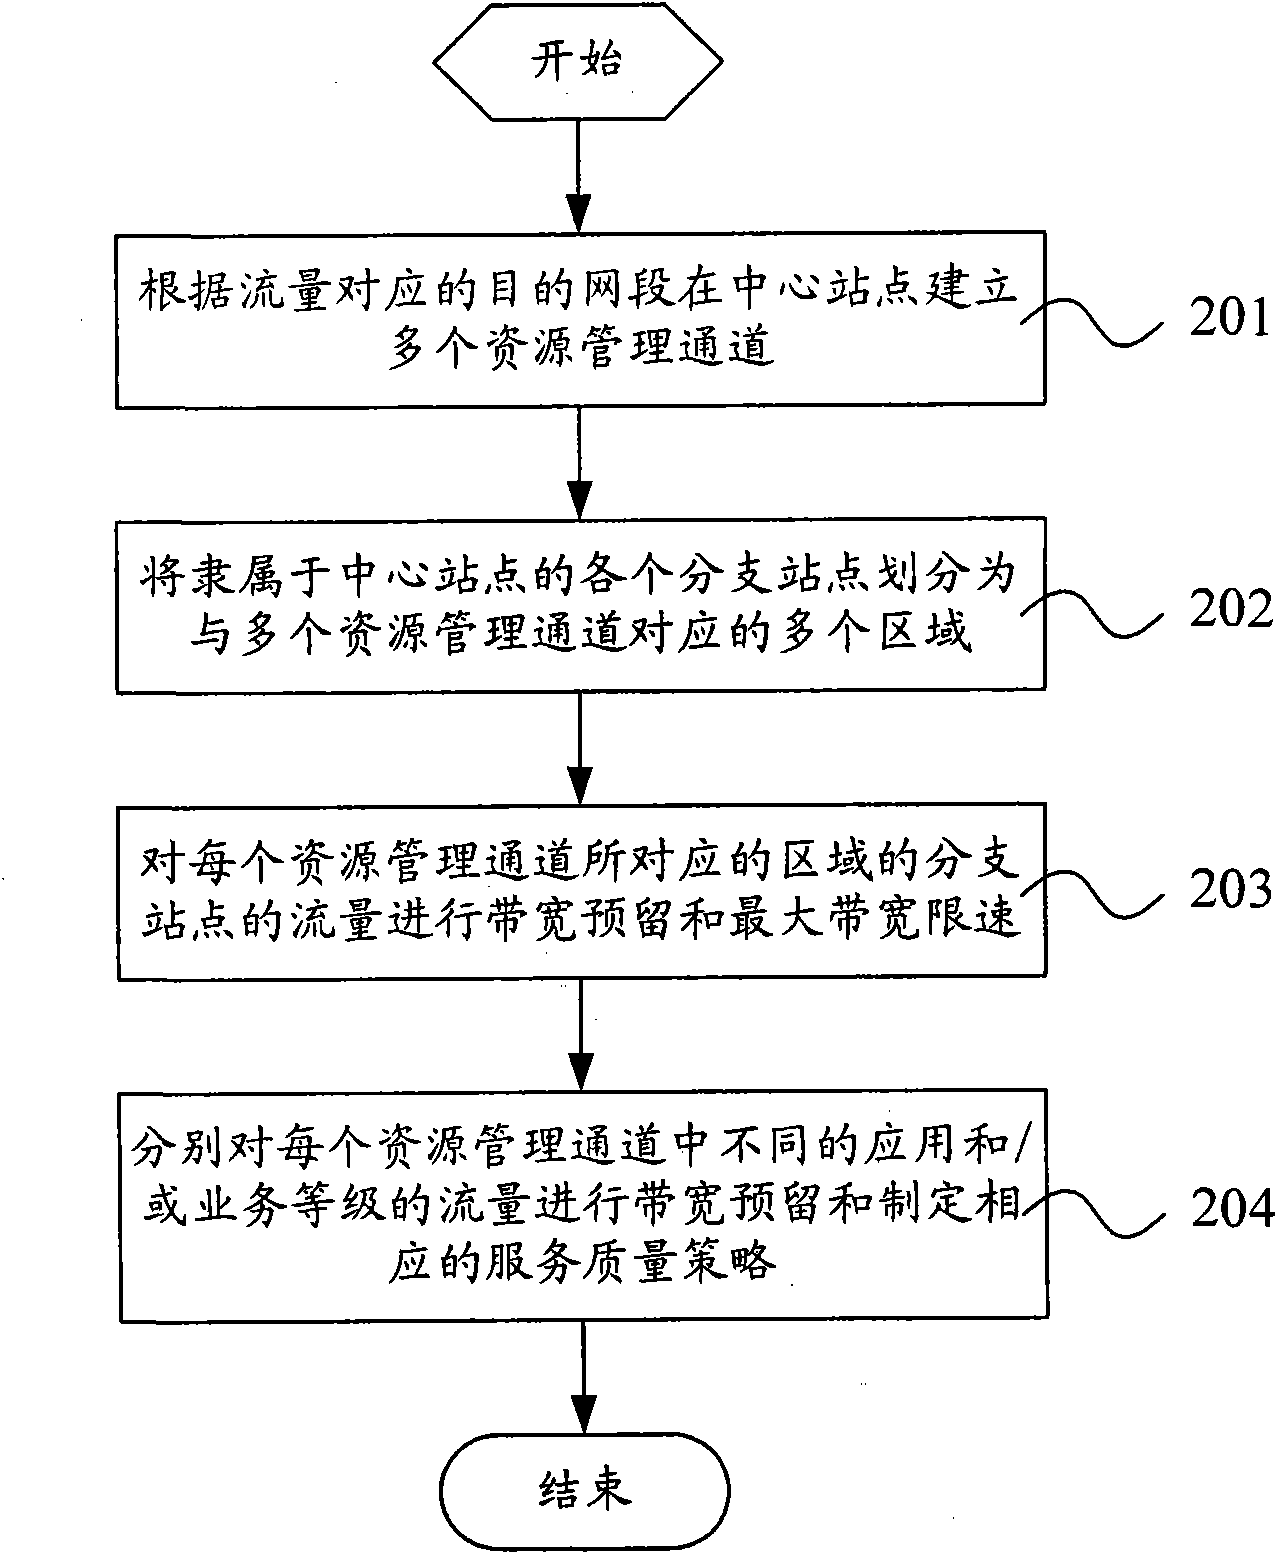 Method and system for allocating network resources